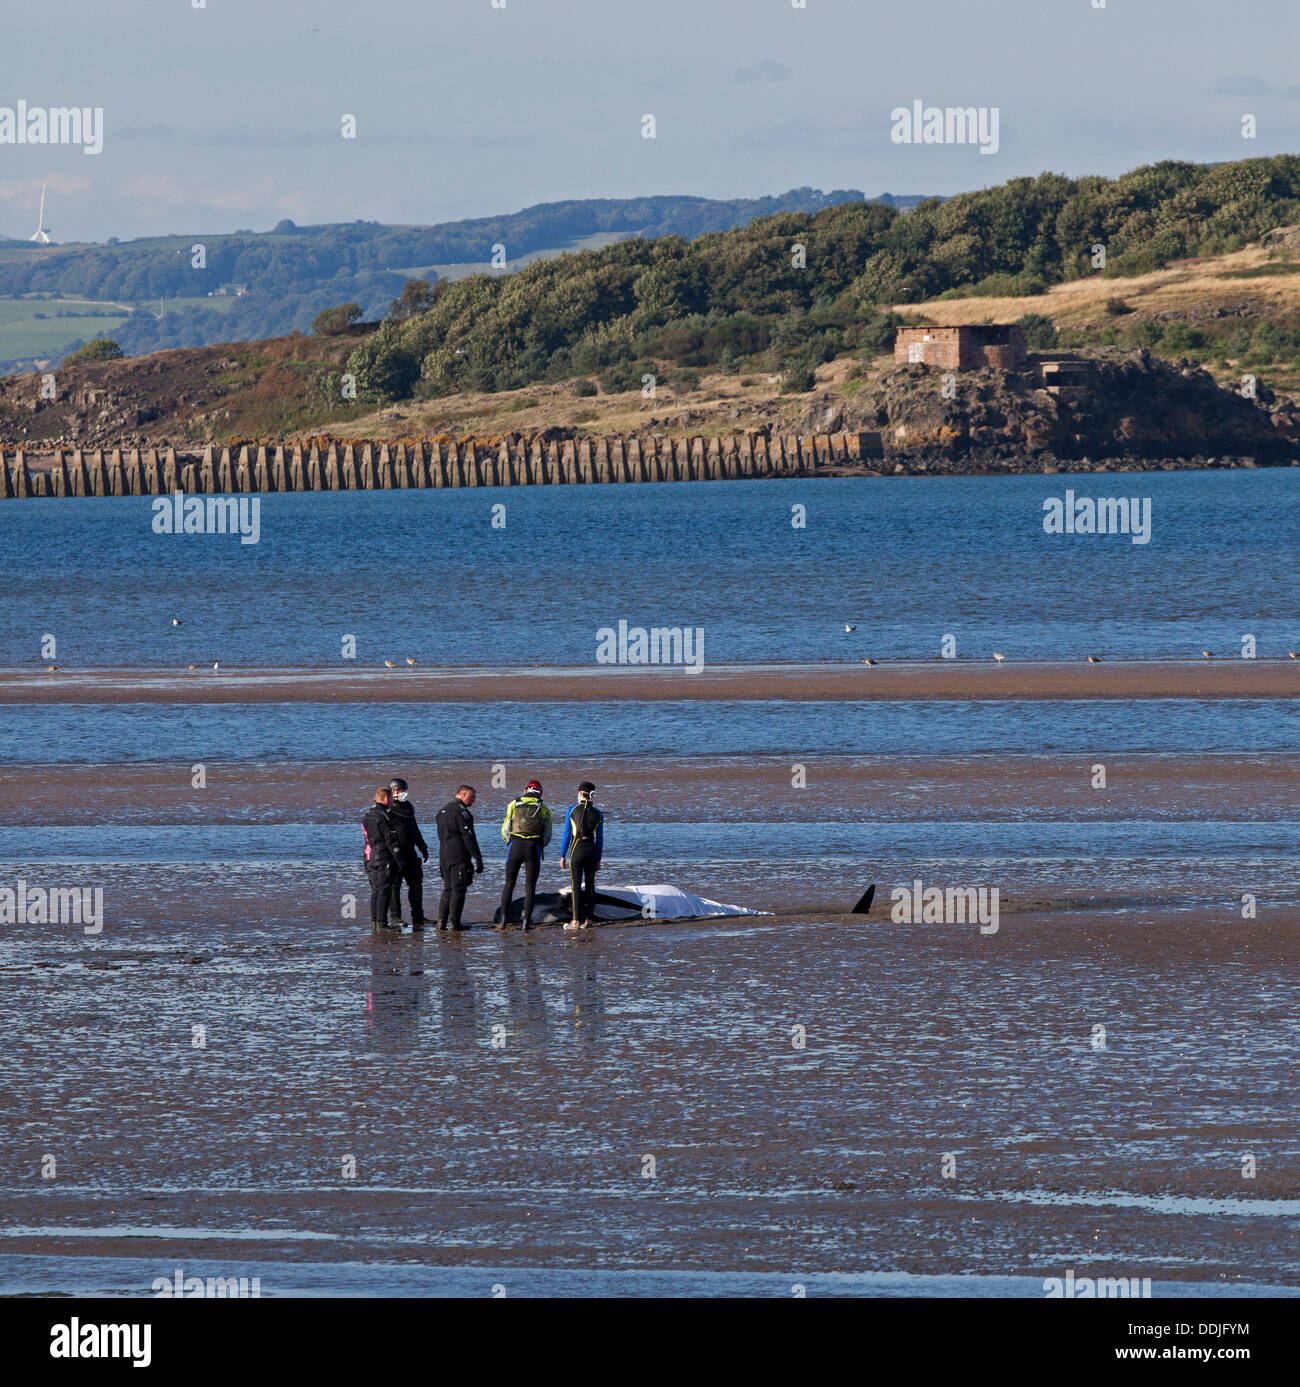 Edinburgh, Scotland, UK, 3rd September 2013, Stranded Pilot Whale just off Silverknowes promenade, Cramond, Coastguard Rescue and Marine Mammal Medics struggle to keep it calm until it manages to swim off around lunch time, however at that time it had only swum along close to shore. It died later that day. Stock Photo